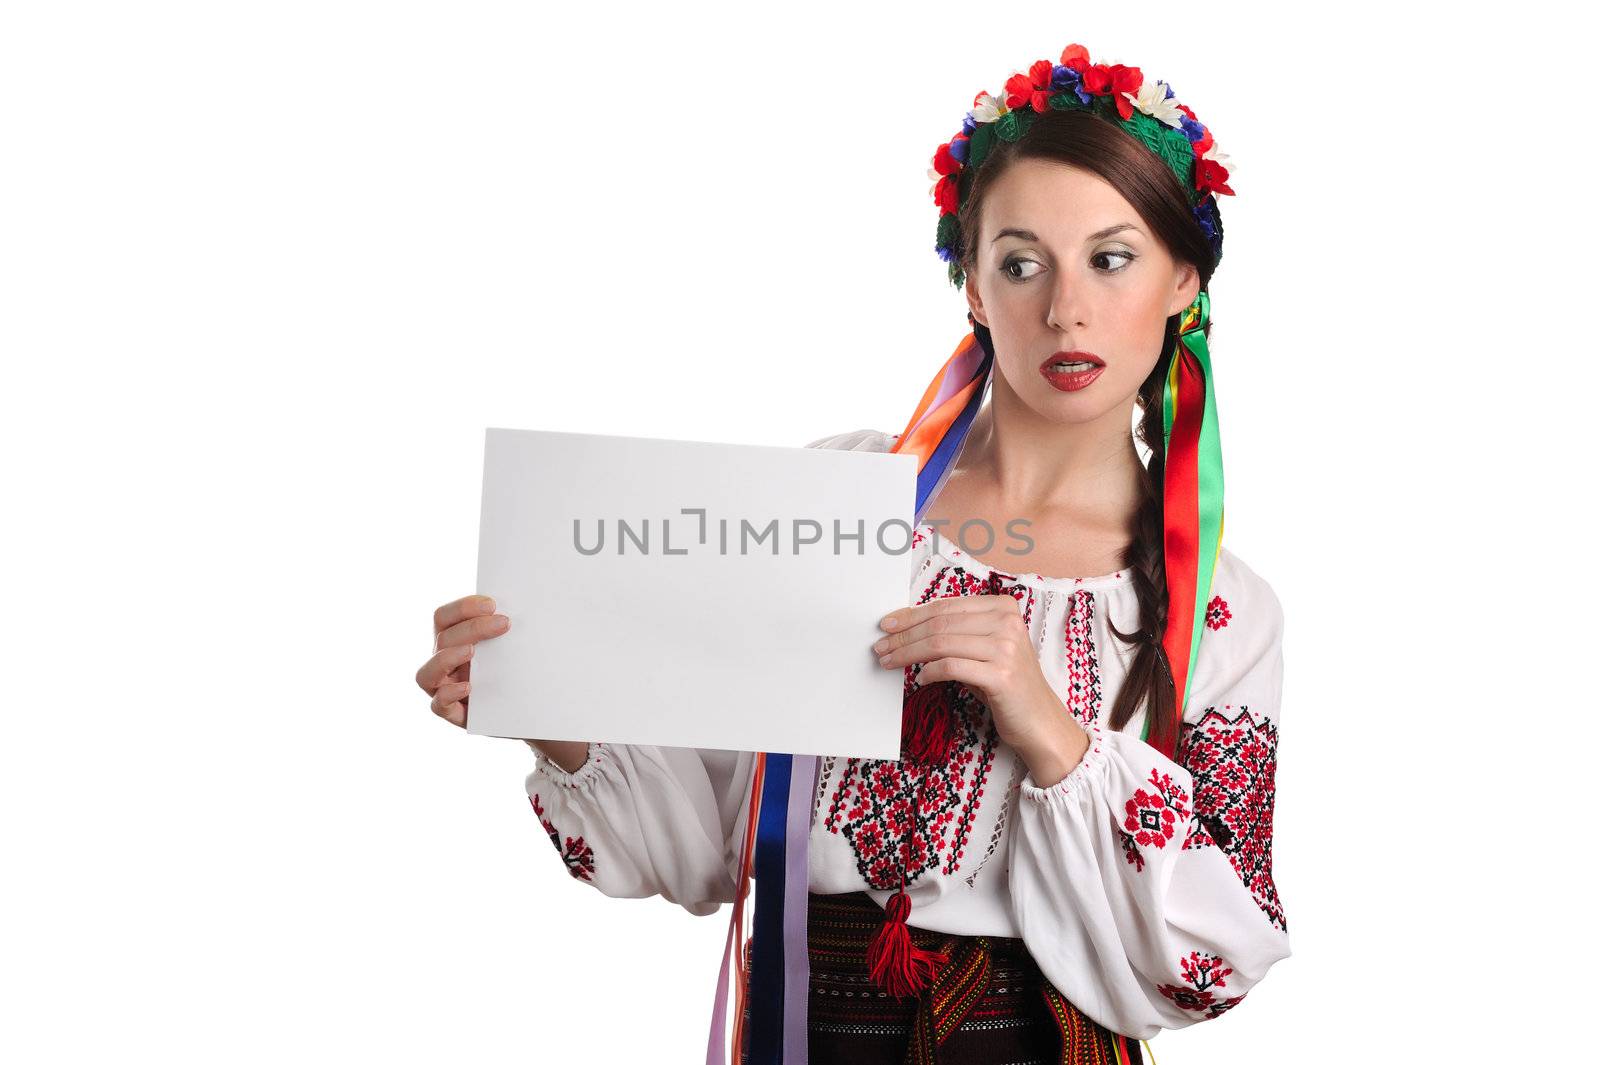 Young Ukrainian woman in national costume showing empty sheet of paper. Isolated on white background